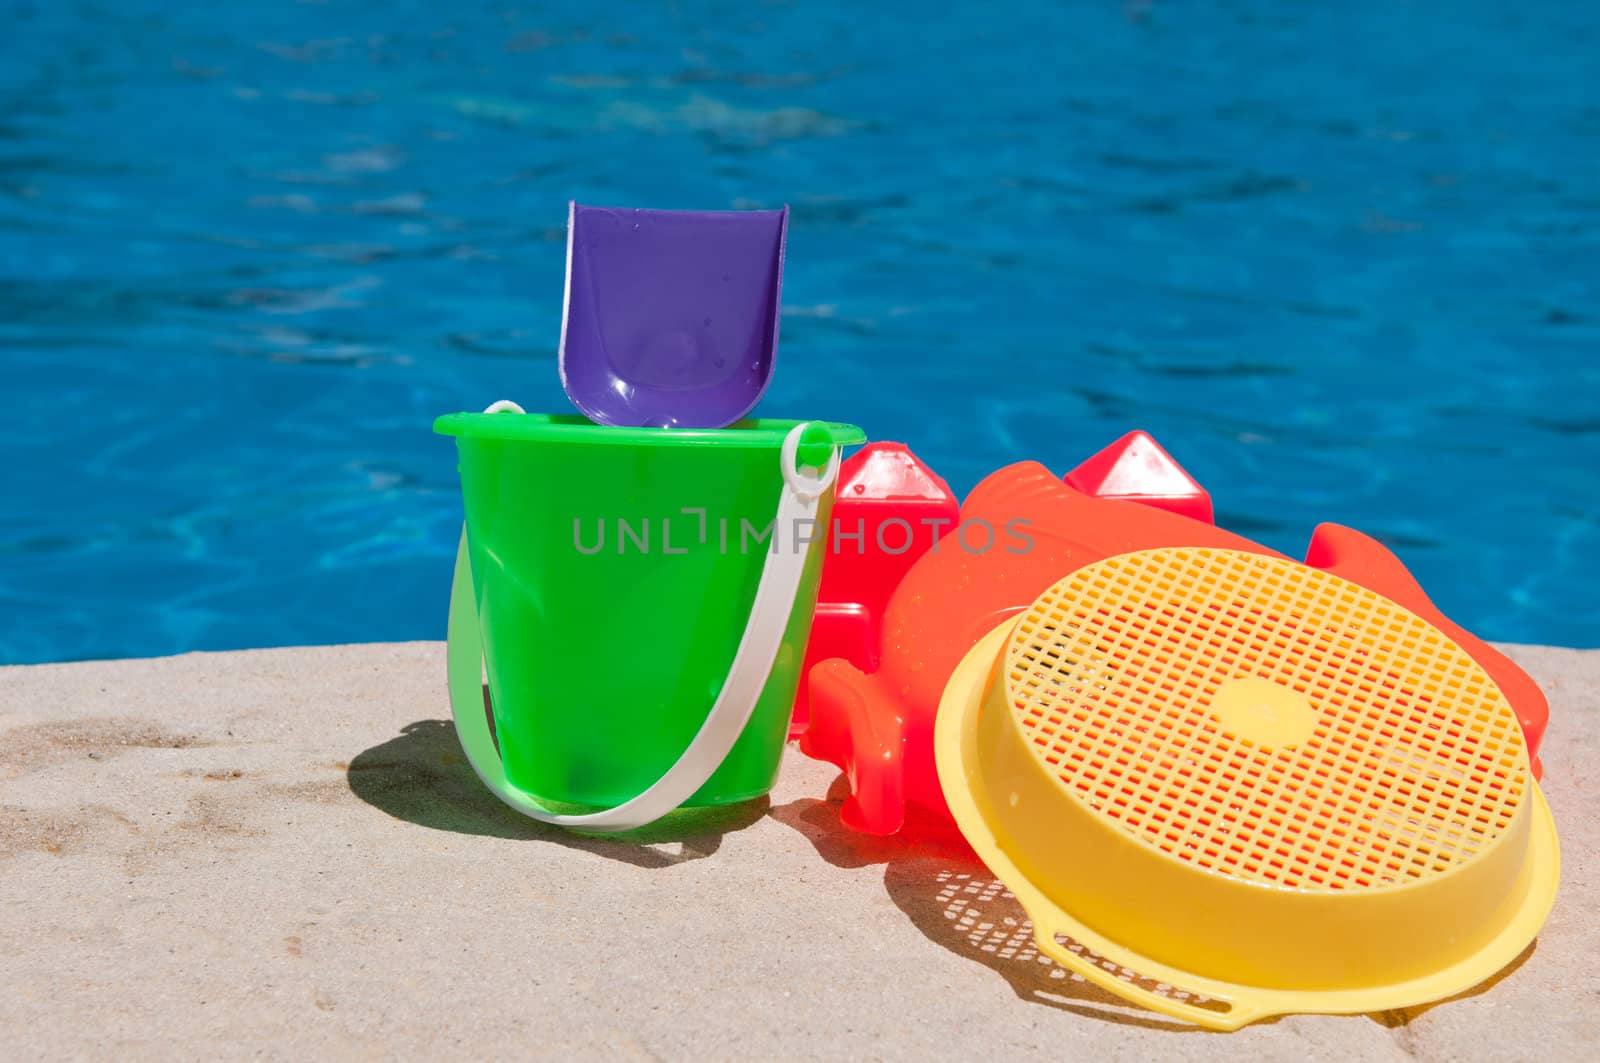 bright and colorful children toys at poolside (family vacations concept)